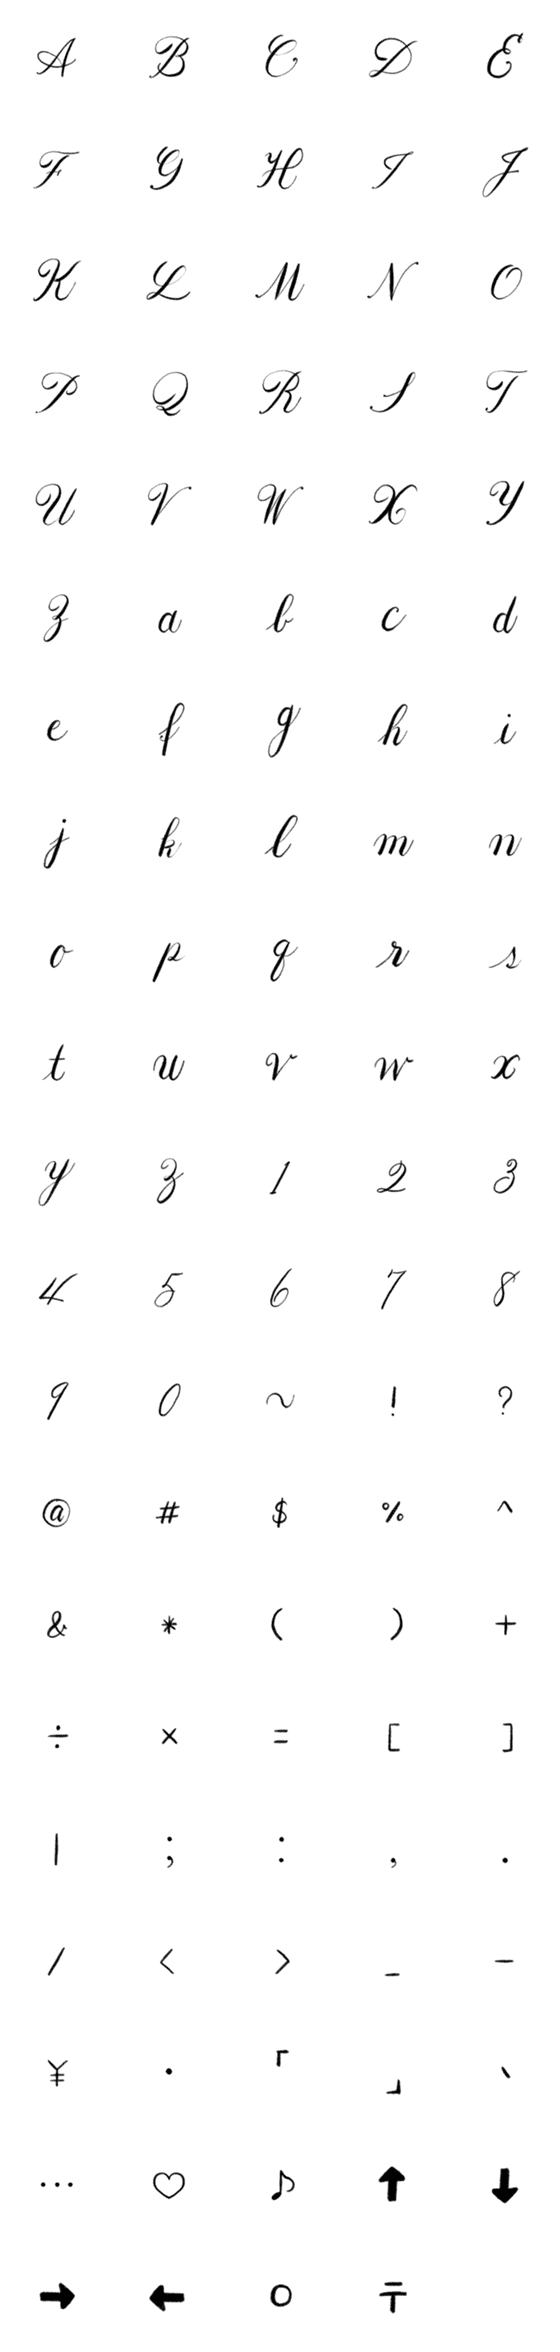 [LINE絵文字]Copperplate hand letteringの画像一覧